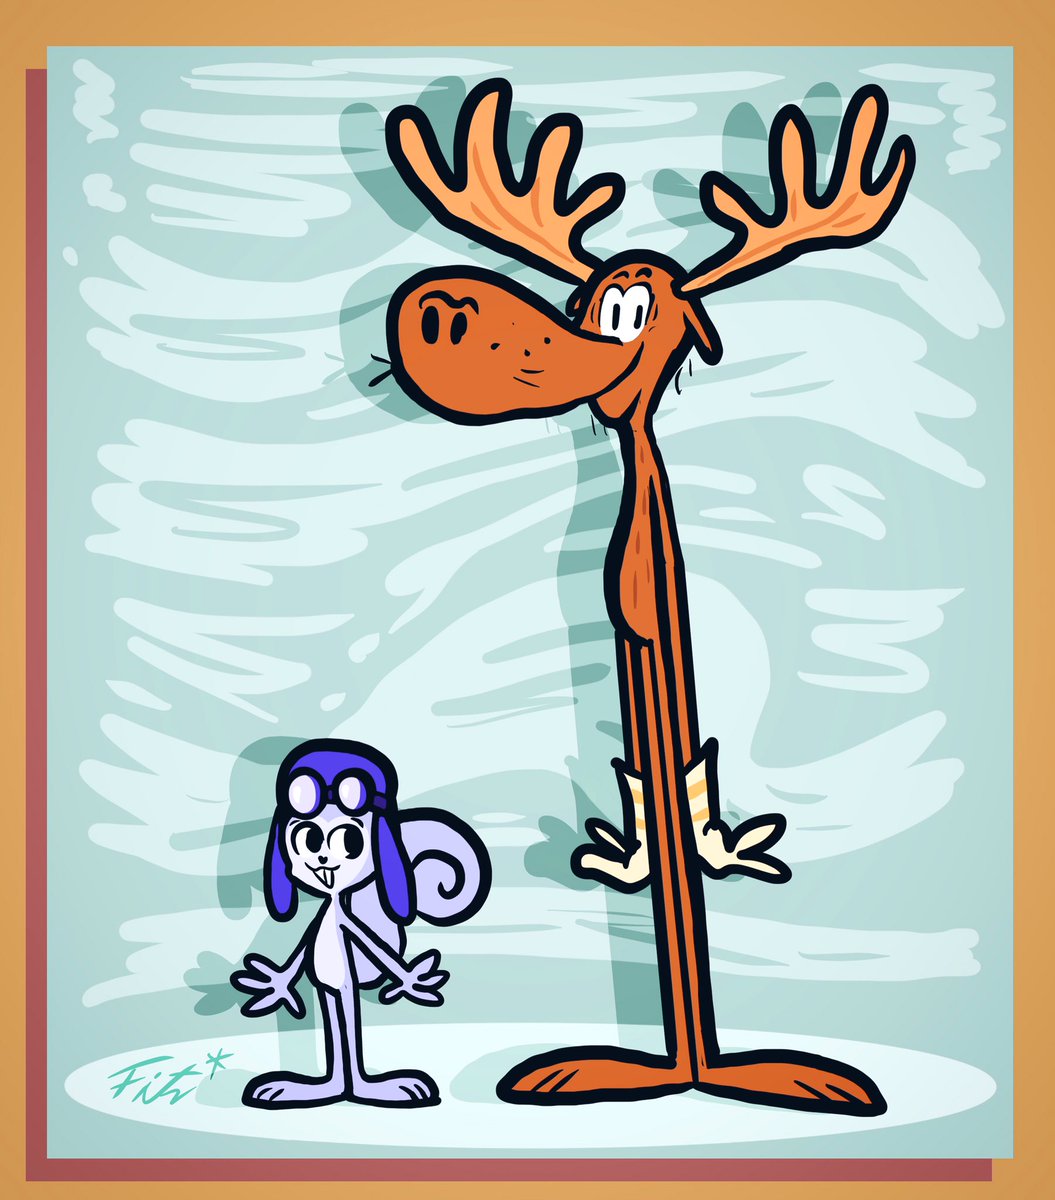 After sharing my take on Jay Ward’s Mr. Peabody and Sherman, here’s my take on the squirrel and moose duo Rocky and Bullwinkle. Enjoy. ^_^ #rockyandbullwinkle #rockyandbullwinkleshow #rockyandbullwinkleandfriends #jayward #cartoon #cartoonart #fanart #moose #squirrel